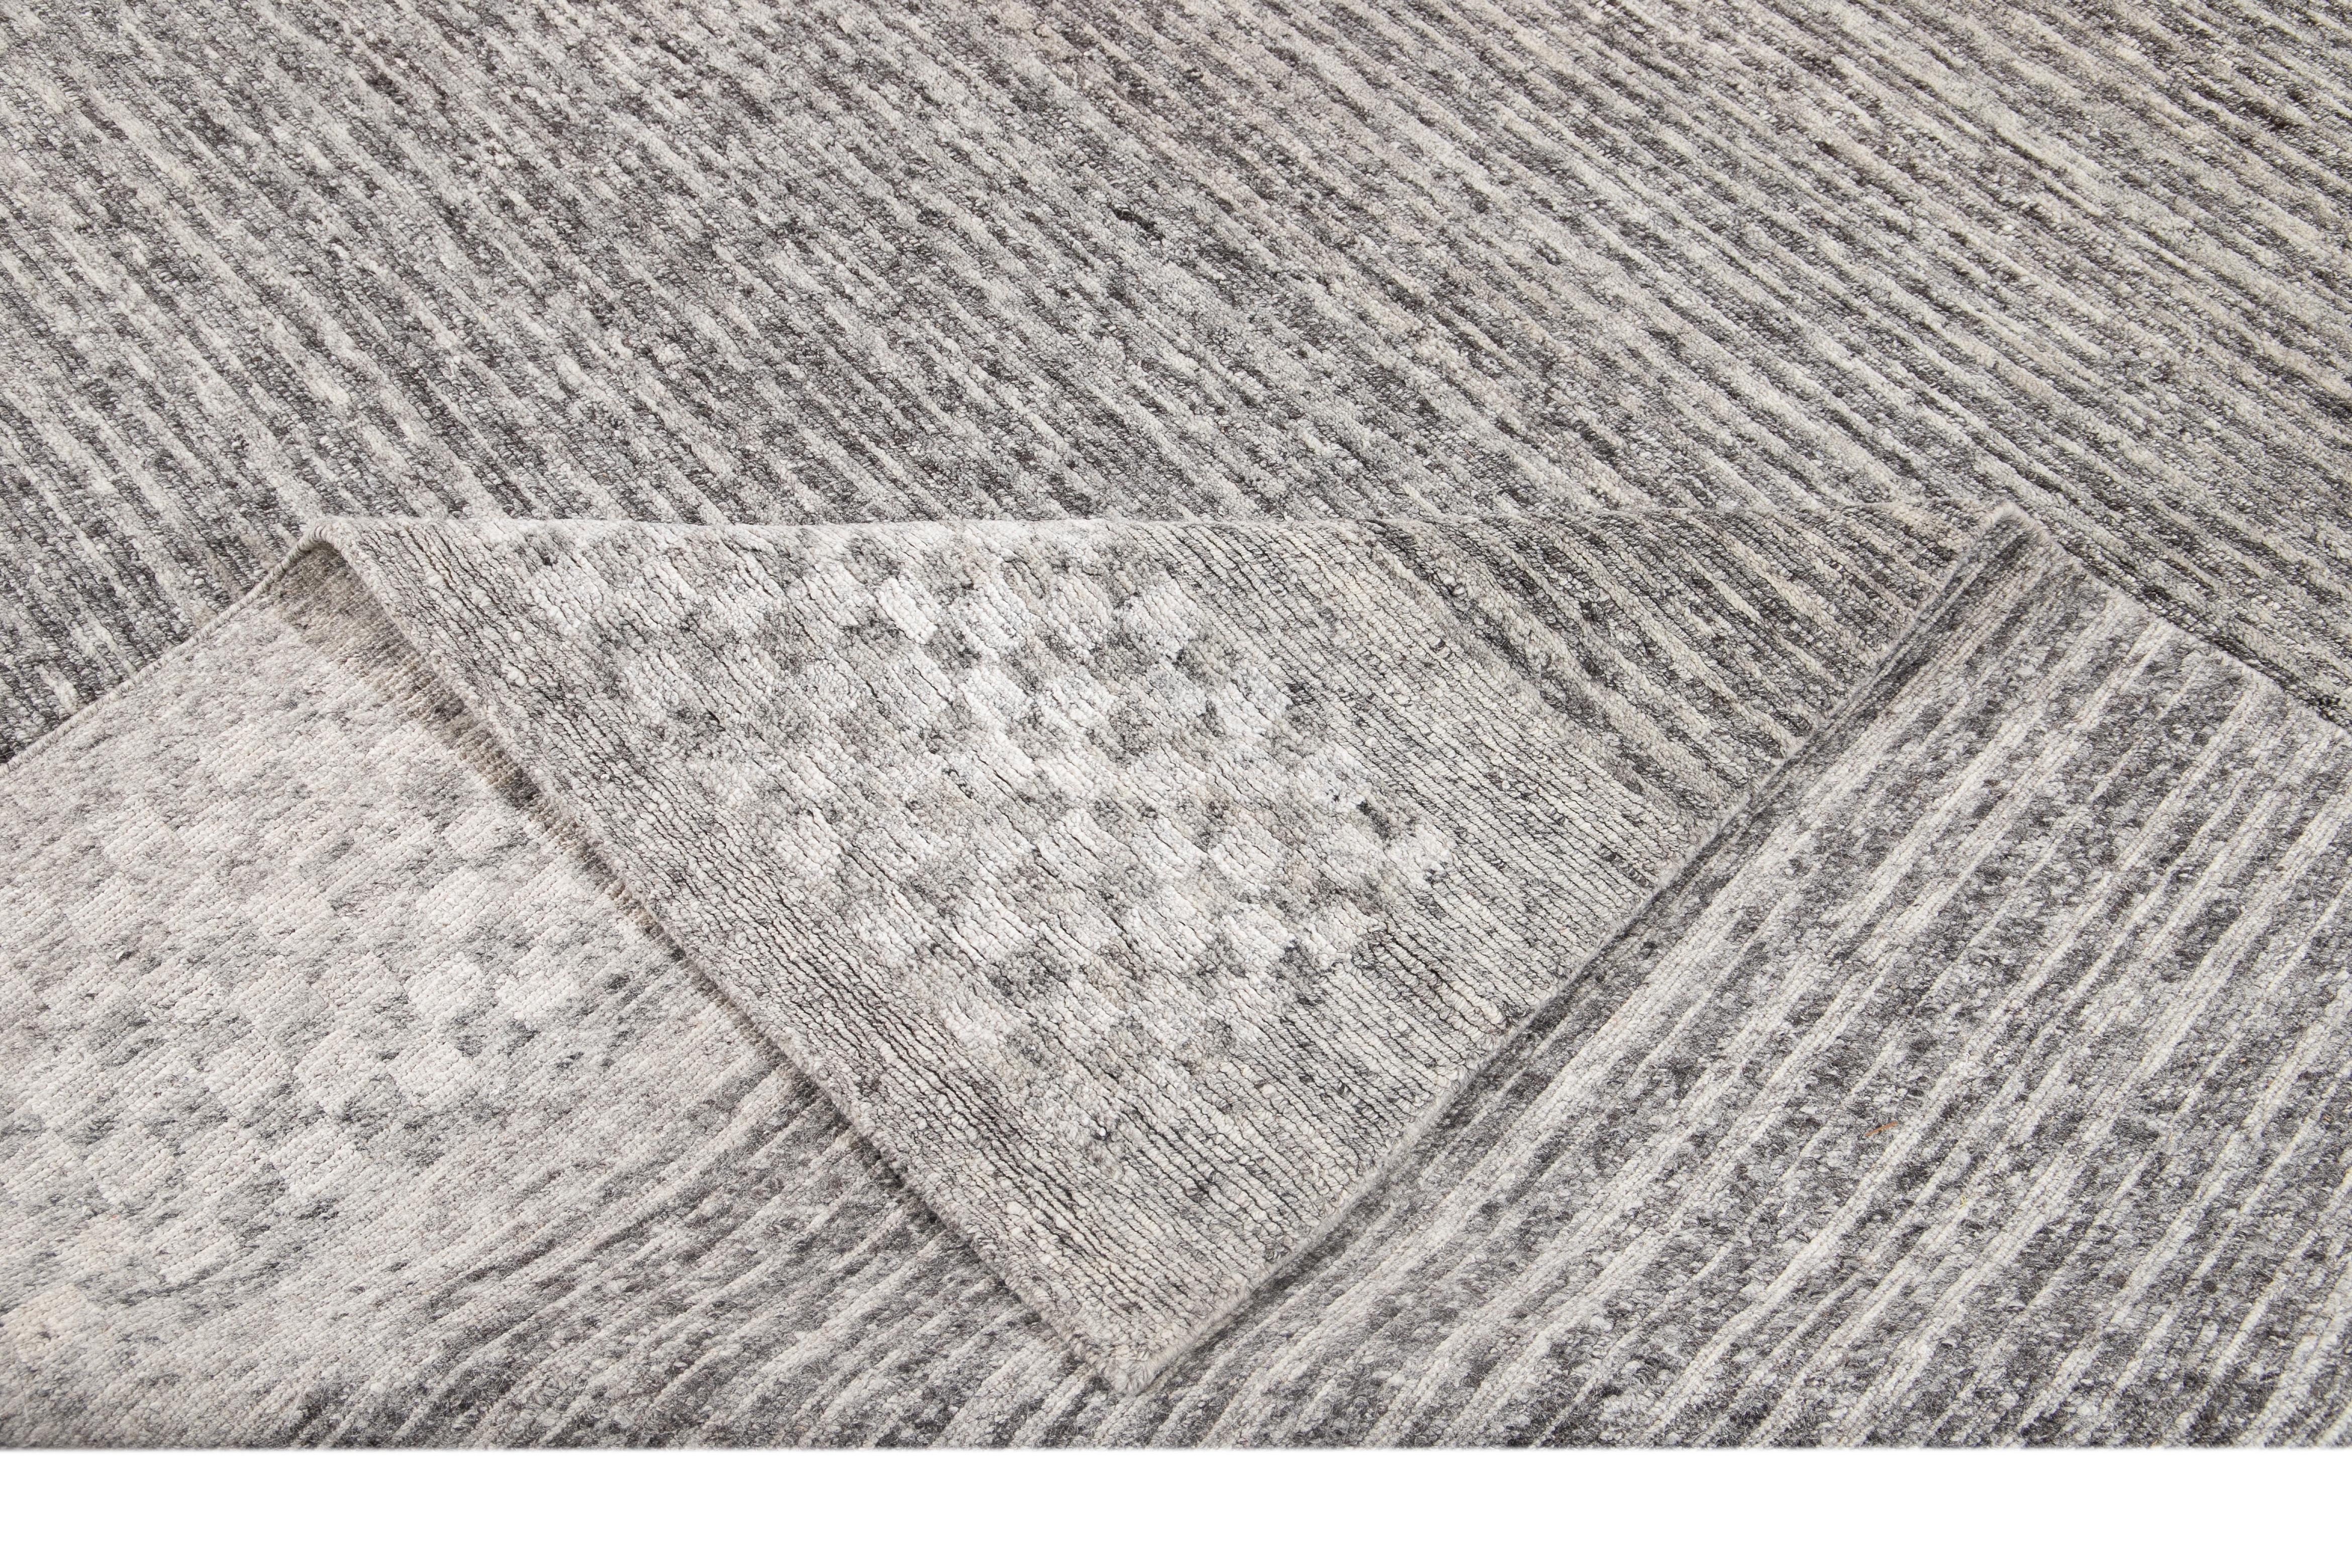 Beautiful modern textured loop Indian rug, hand-knotted wool with a gray field, dark gray and ivory accents, with checkered borders. 

This rug measures 12' 0